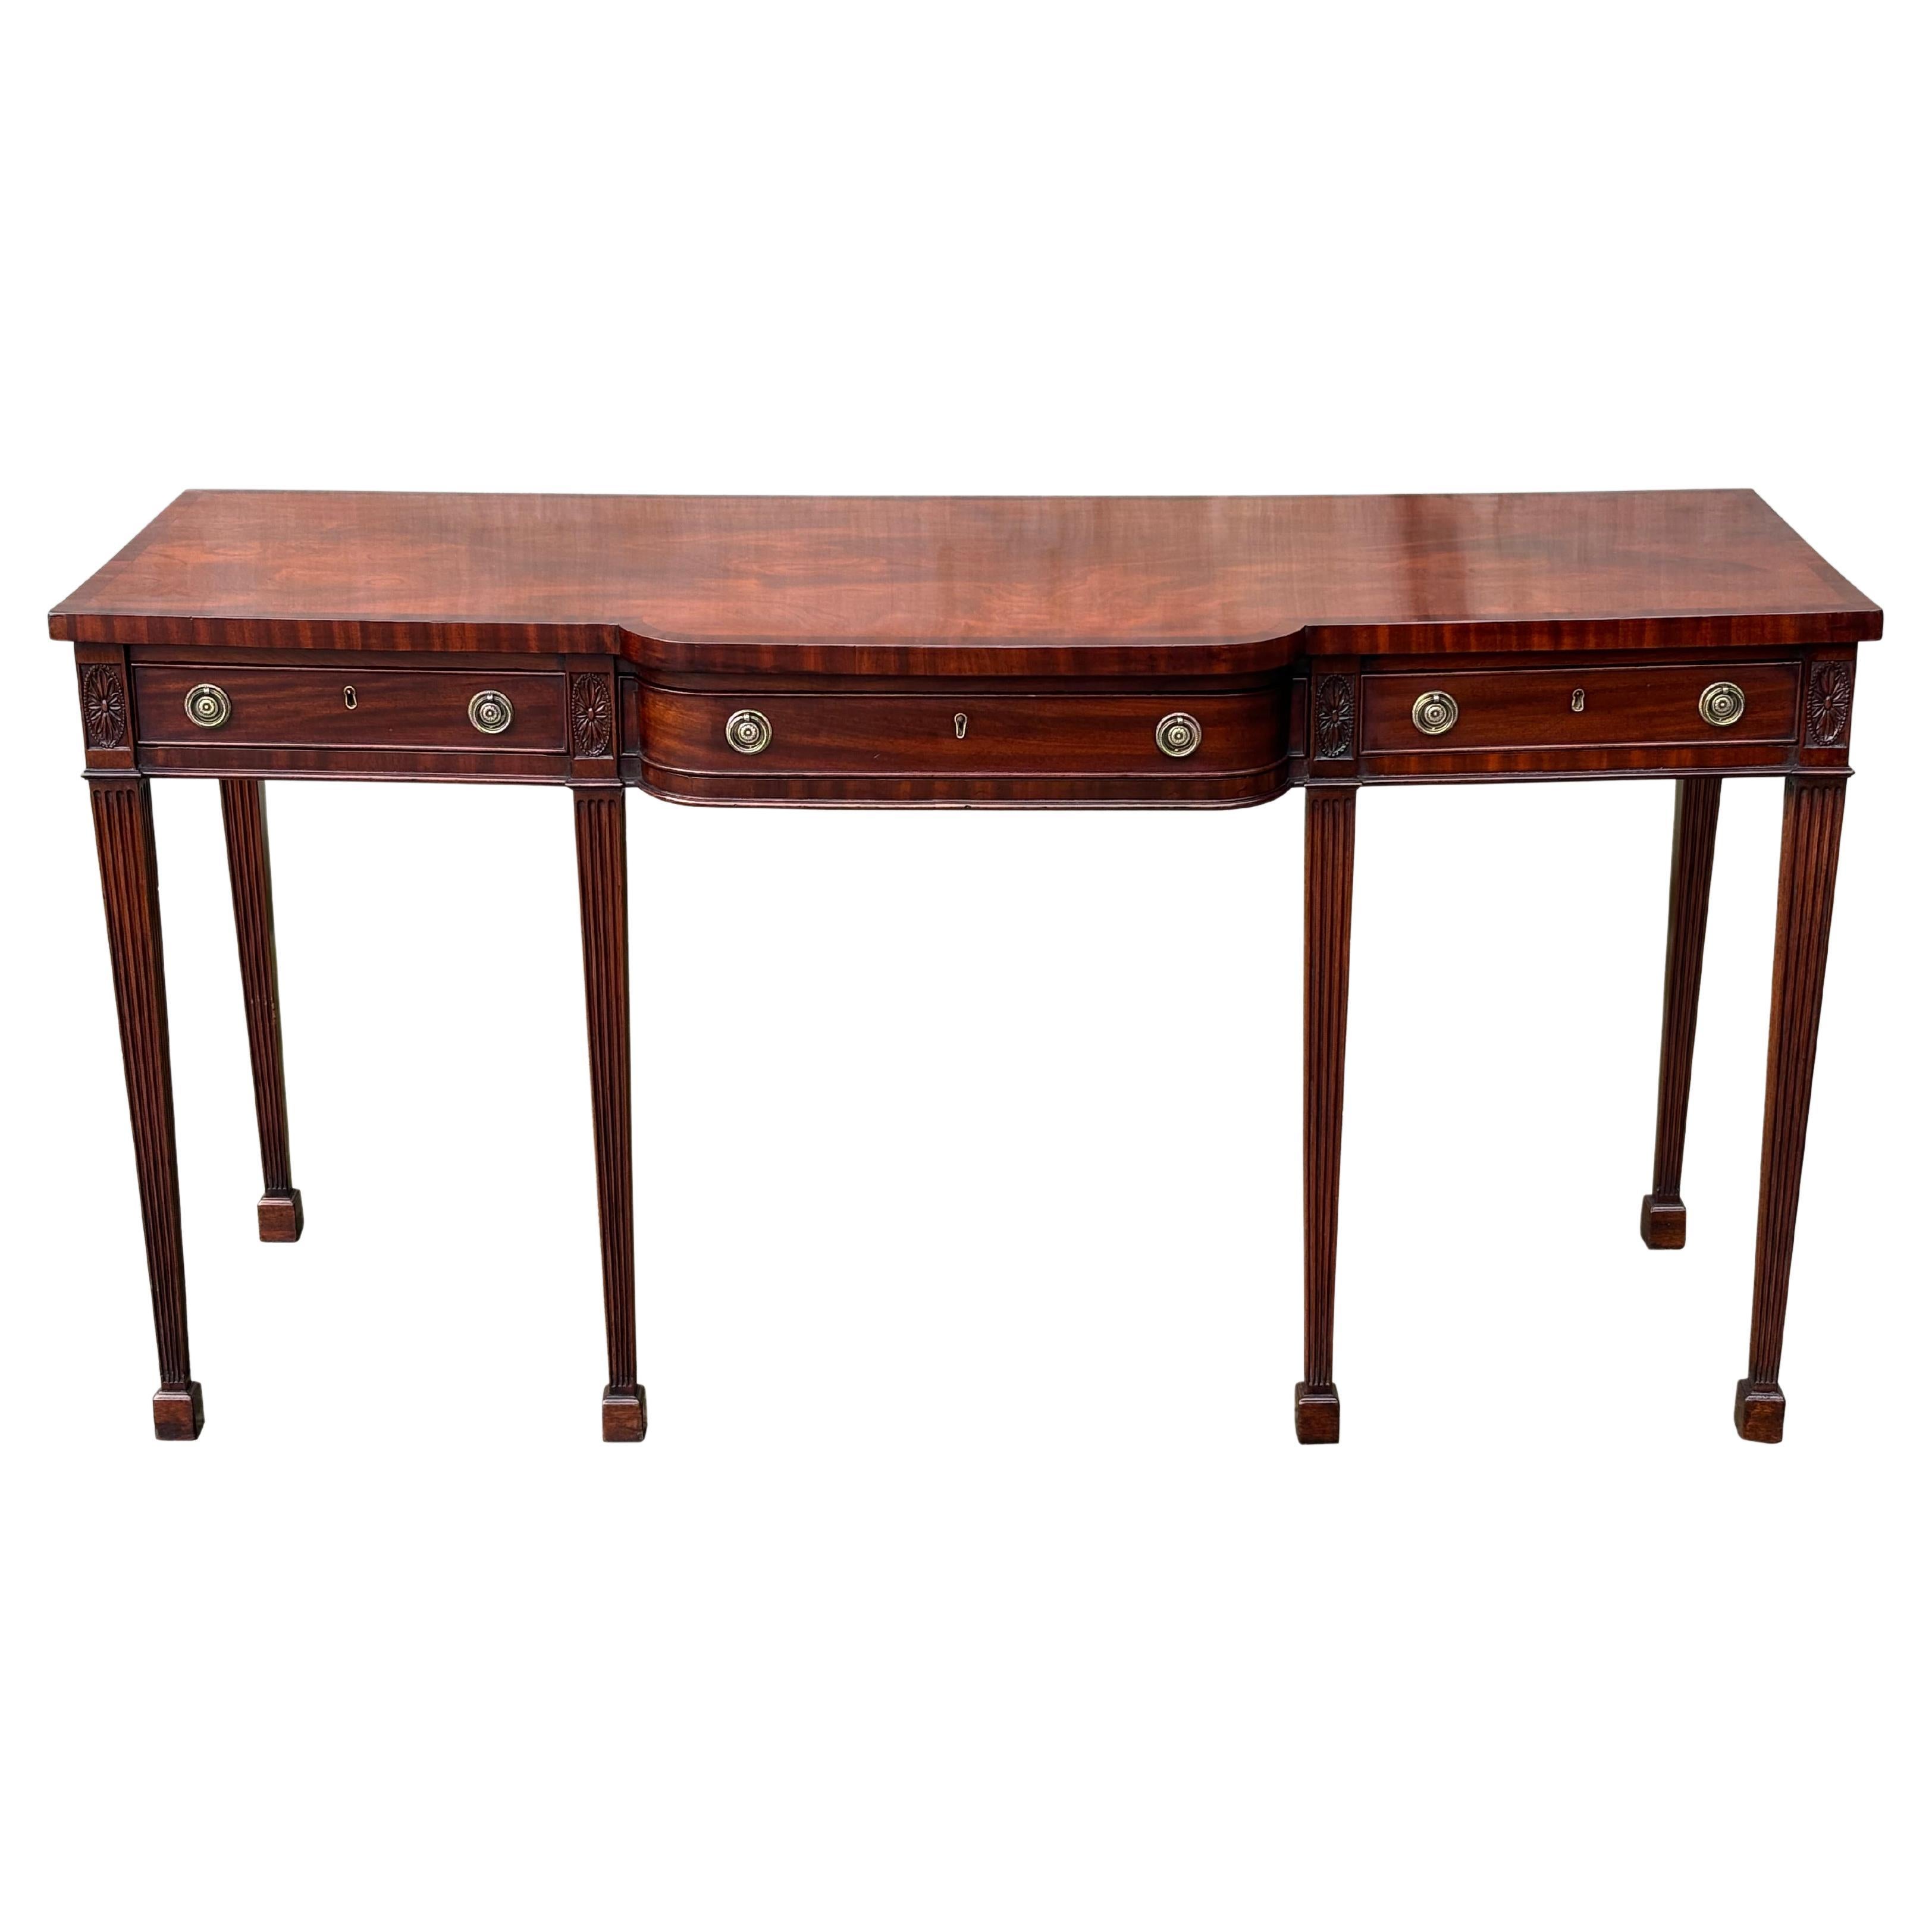 Early 19th Century George III Period Mahogany Serving Table For Sale